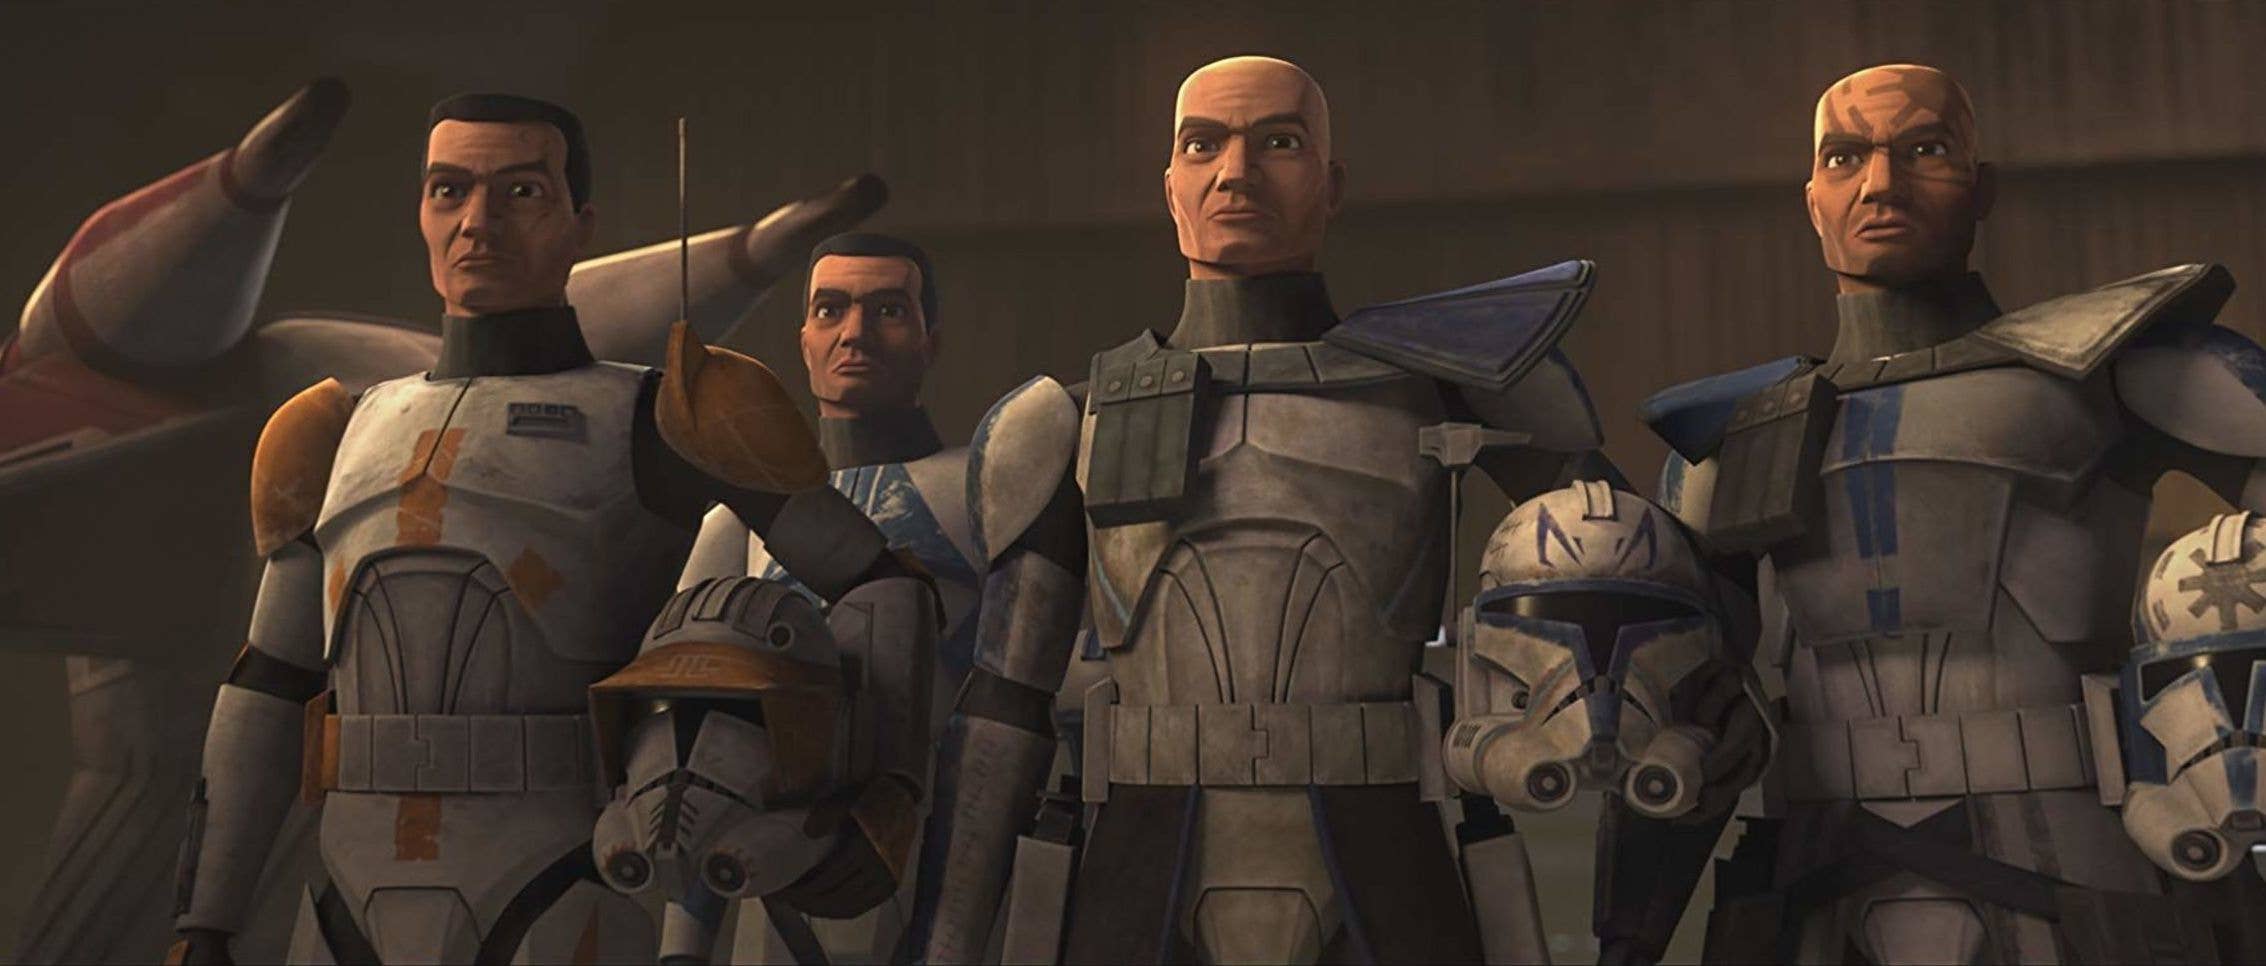 Star Wars: The Clone Wars Season 7 premiere proves it's all about the Clones